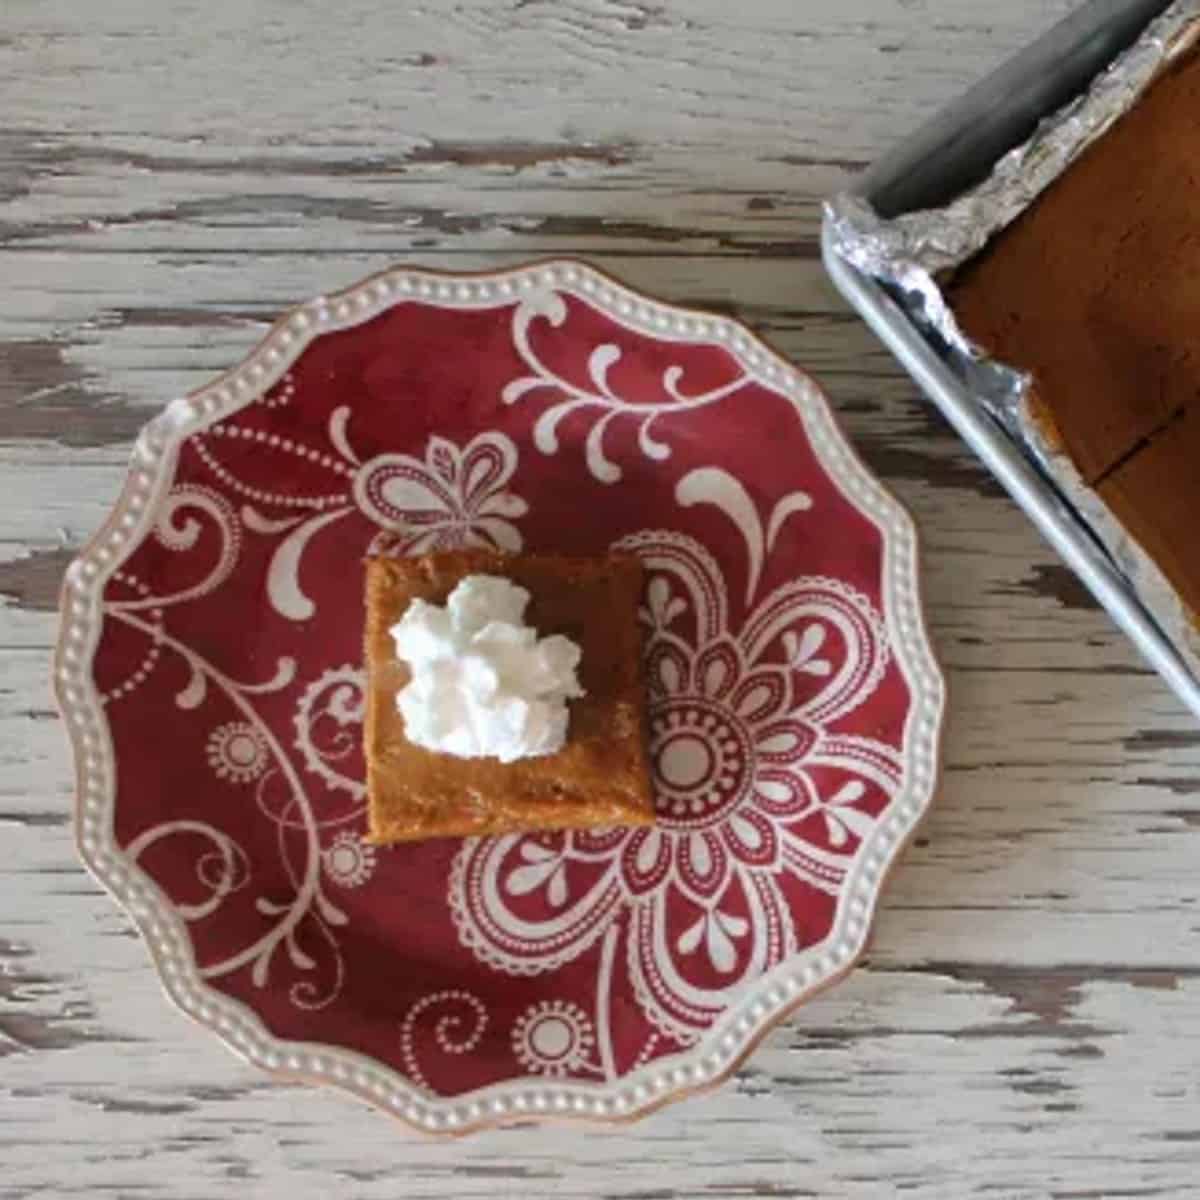 a delicious slice of sheet pan pie crust with a red plate and a square slice of pie with a dollop of whipped cream on top